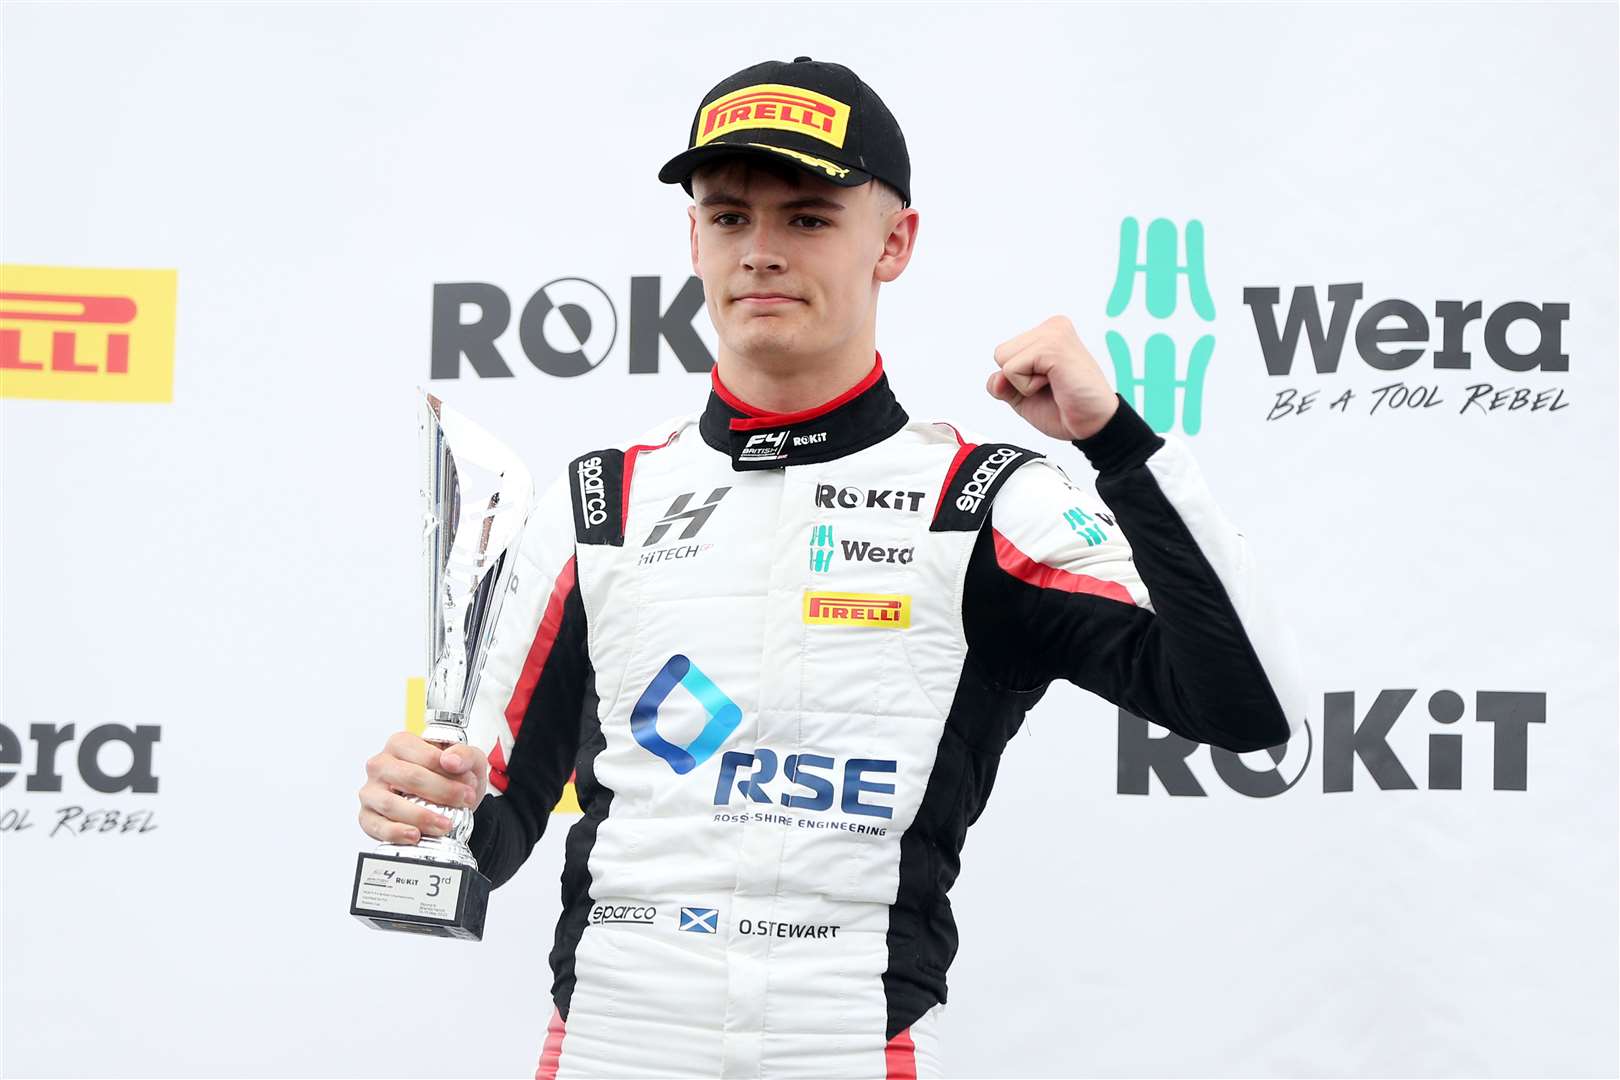 Ollie Stewart claimed his second rookie win of the season on his home track of Knockhill.